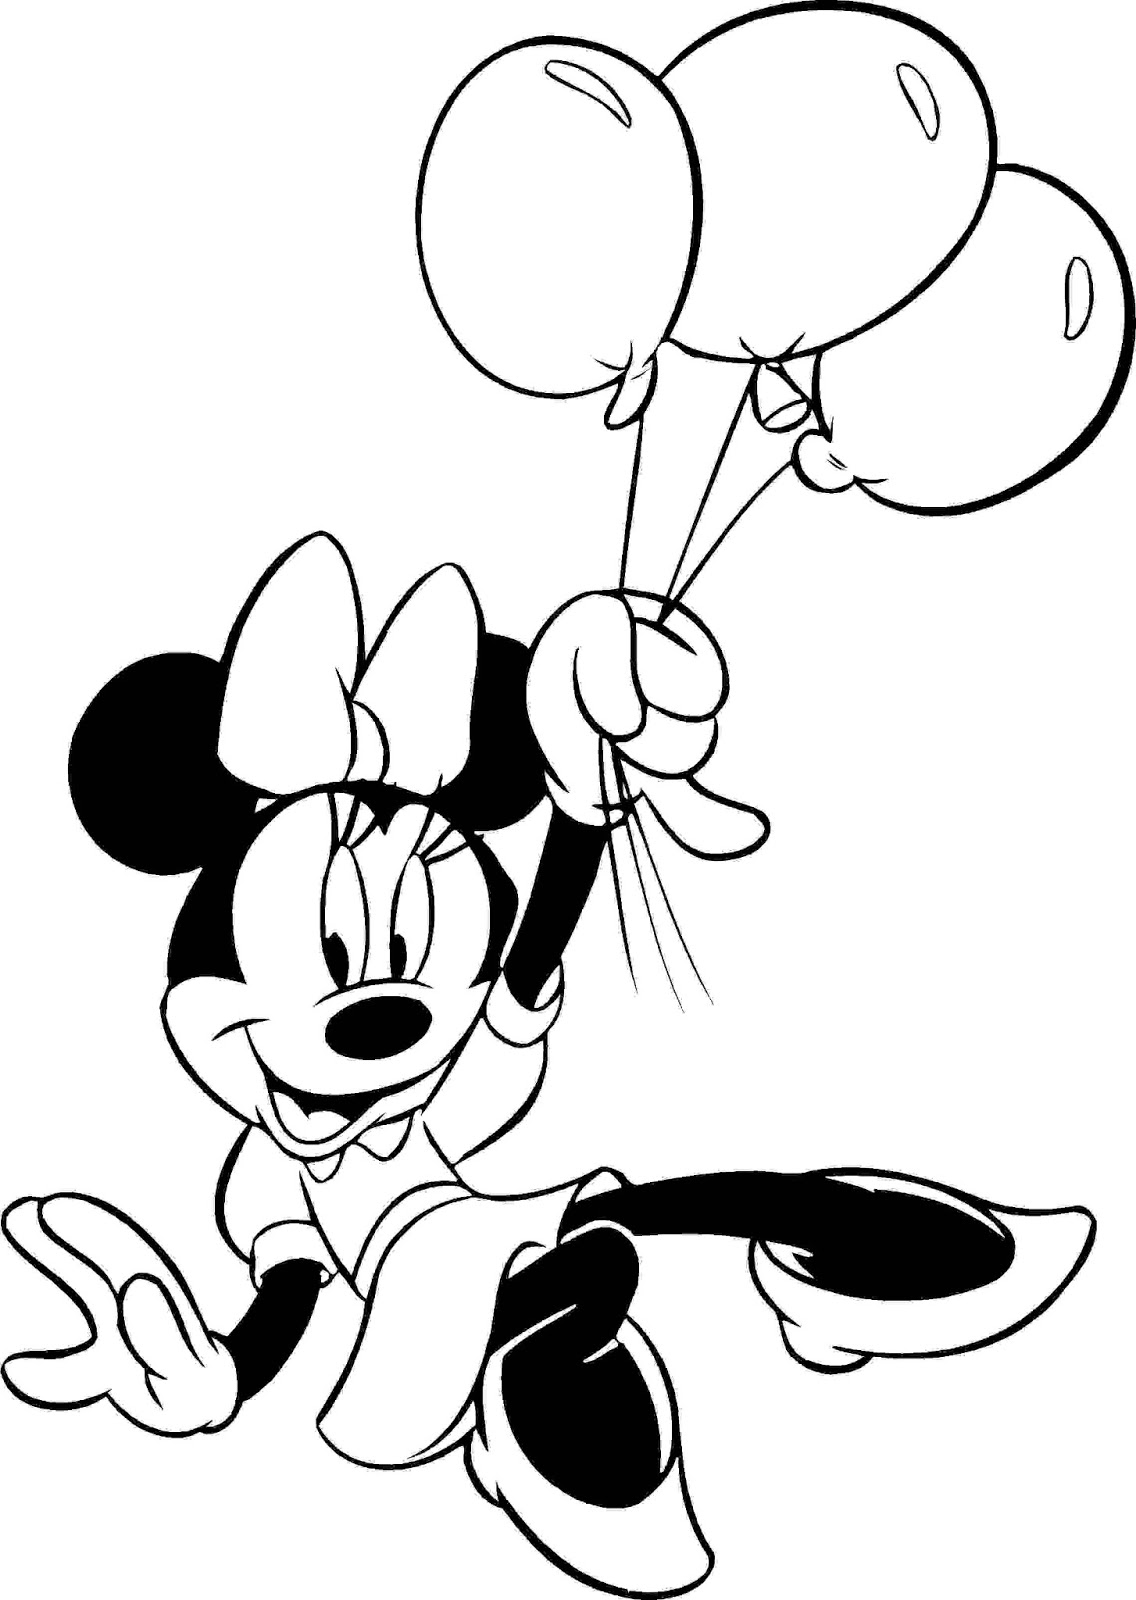 free minnie mouse coloring pages free disney minnie mouse coloring pages free minnie mouse coloring pages 